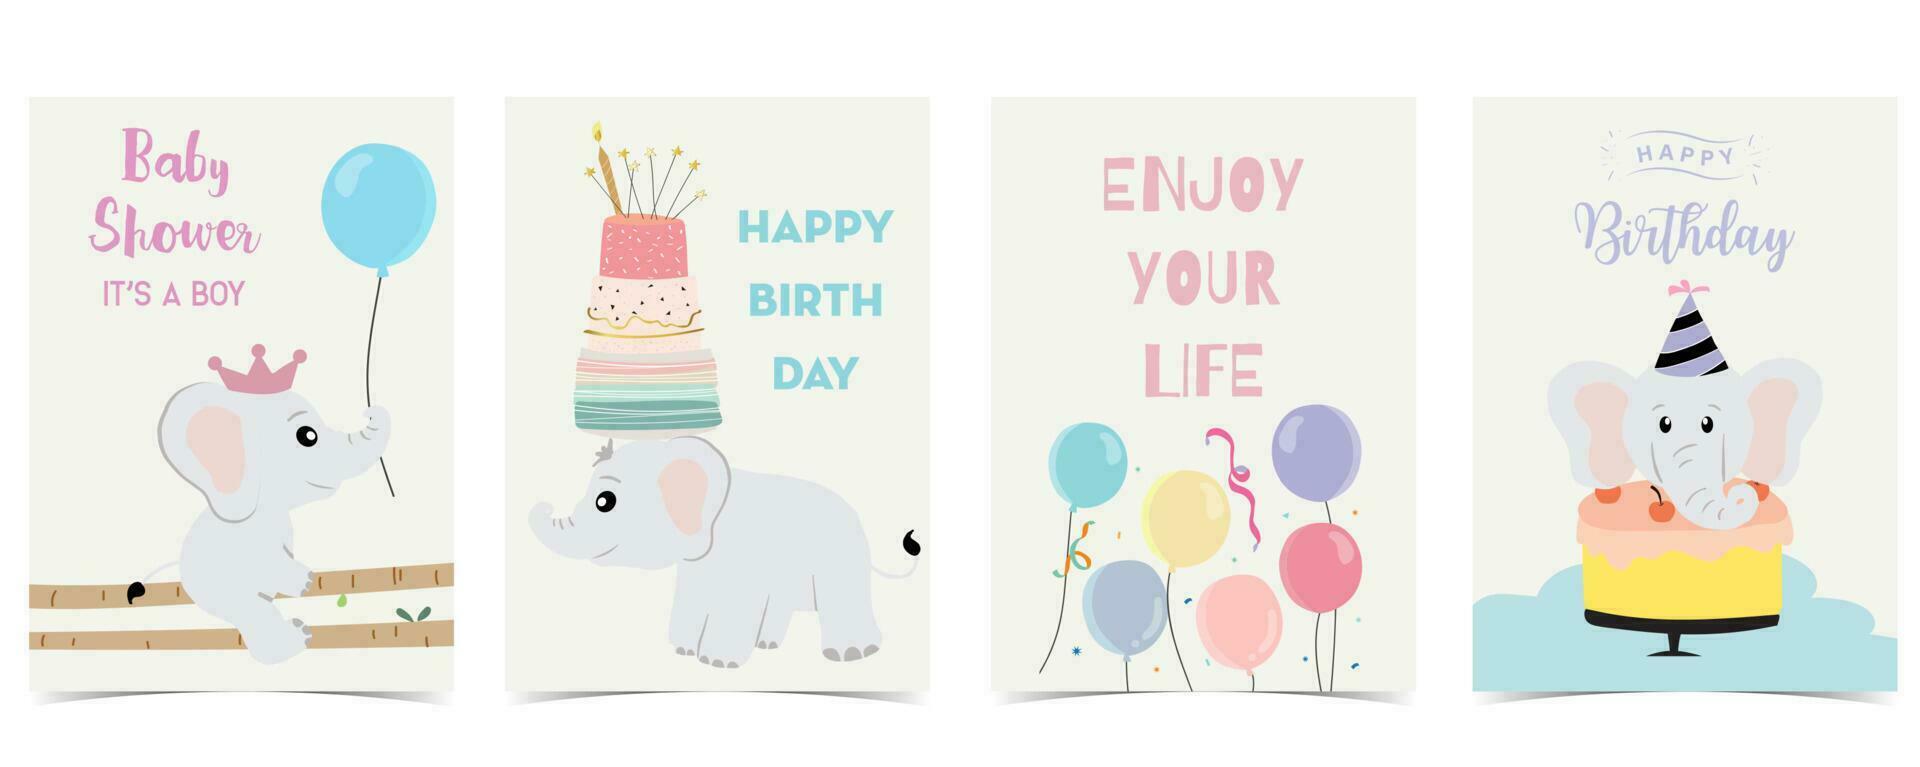 Baby elephant design with cake, balloon, cloud for birthday postcard vector